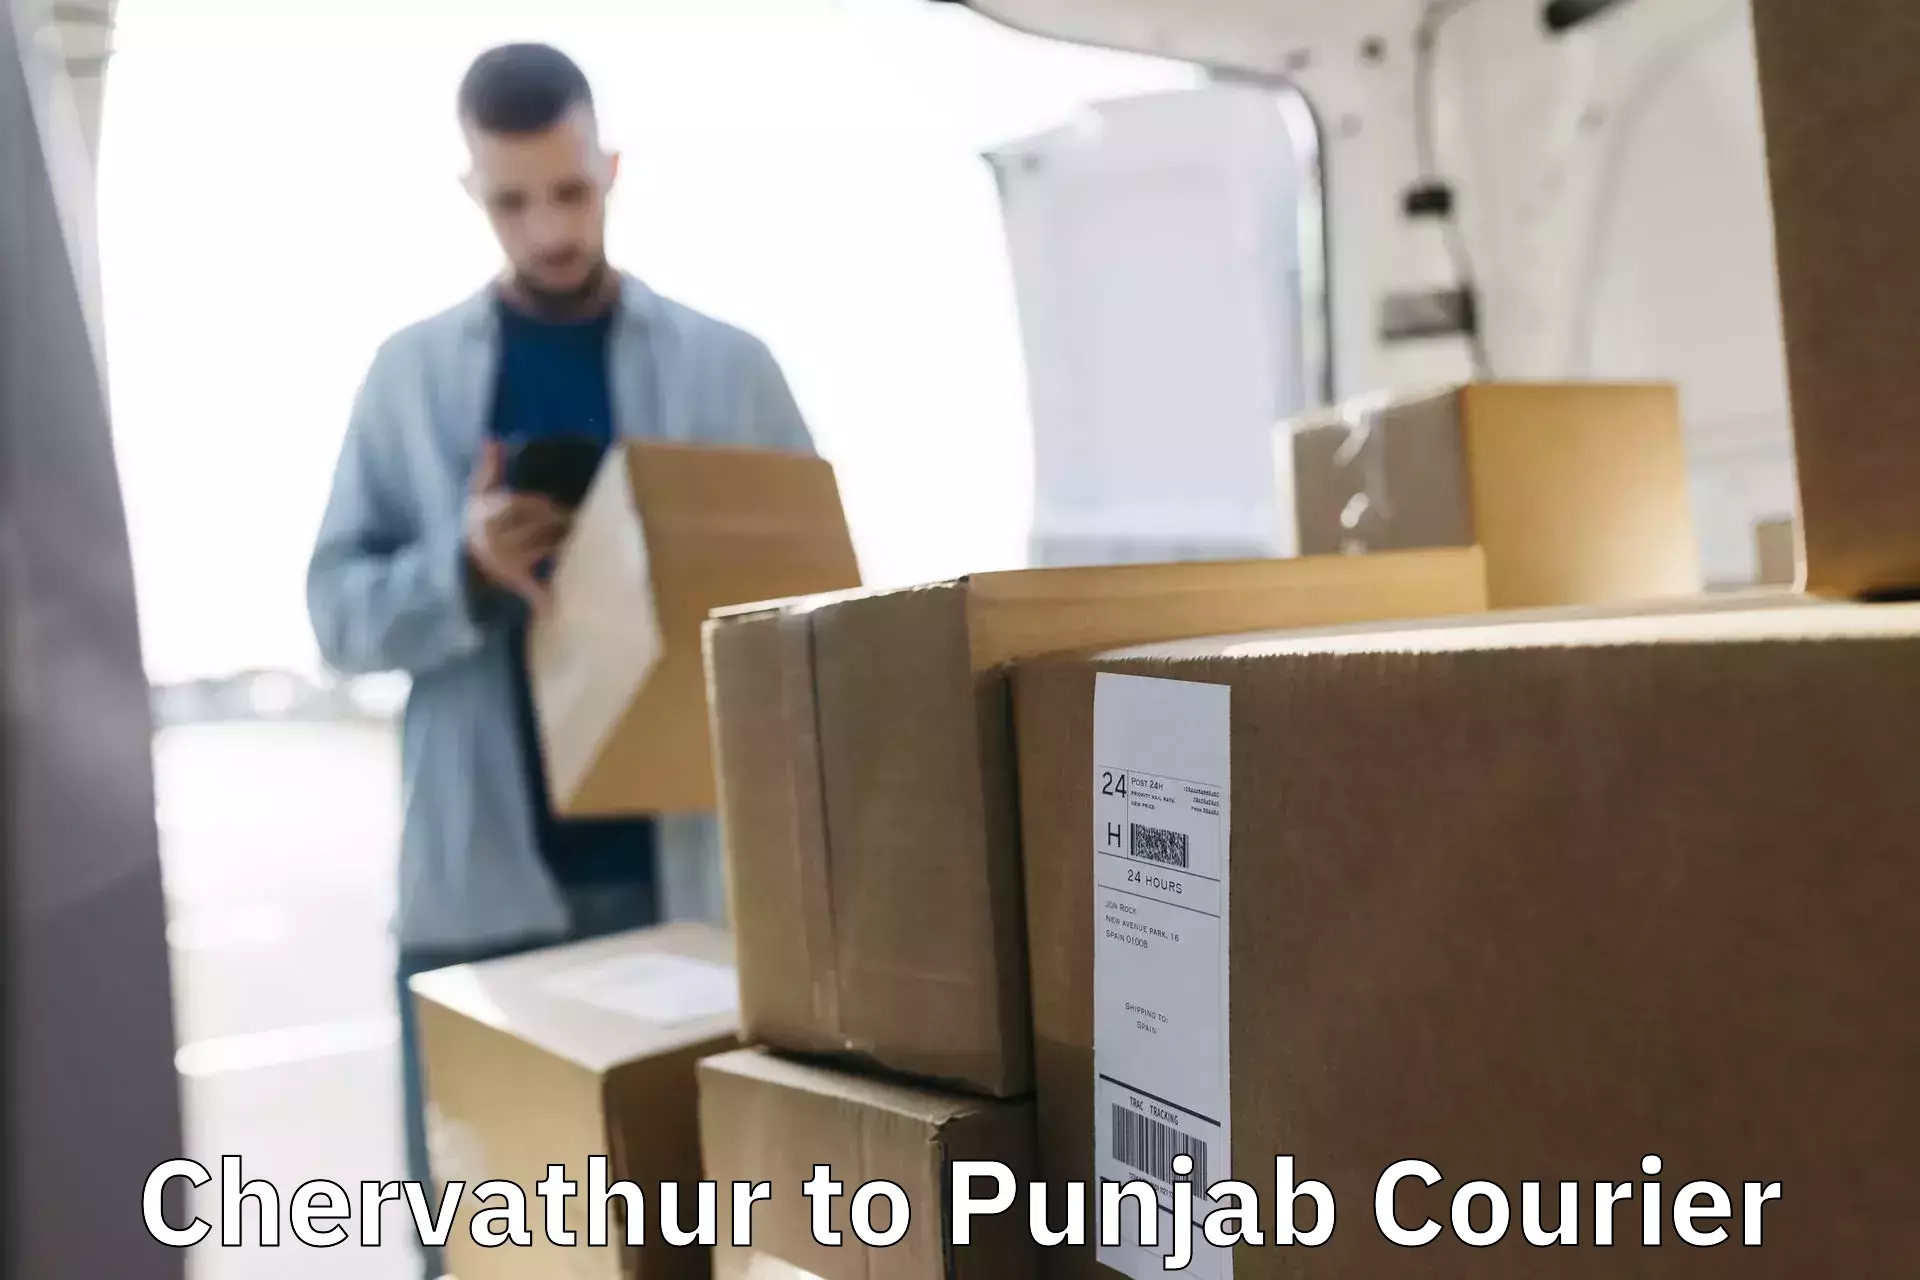 Business delivery service Chervathur to Bathinda